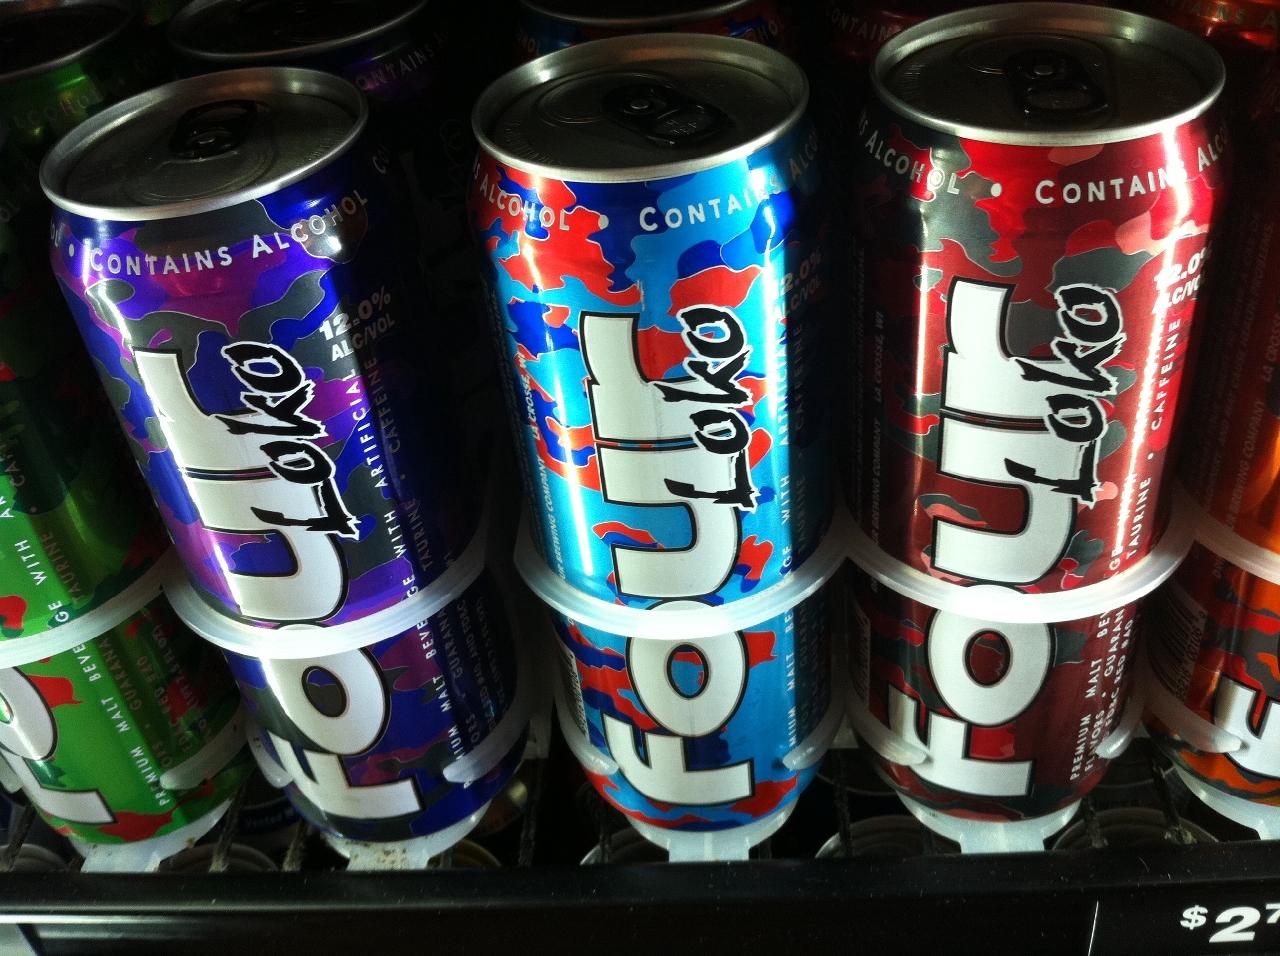 4loko, pumpkin spice lattes, and how to spend $1B